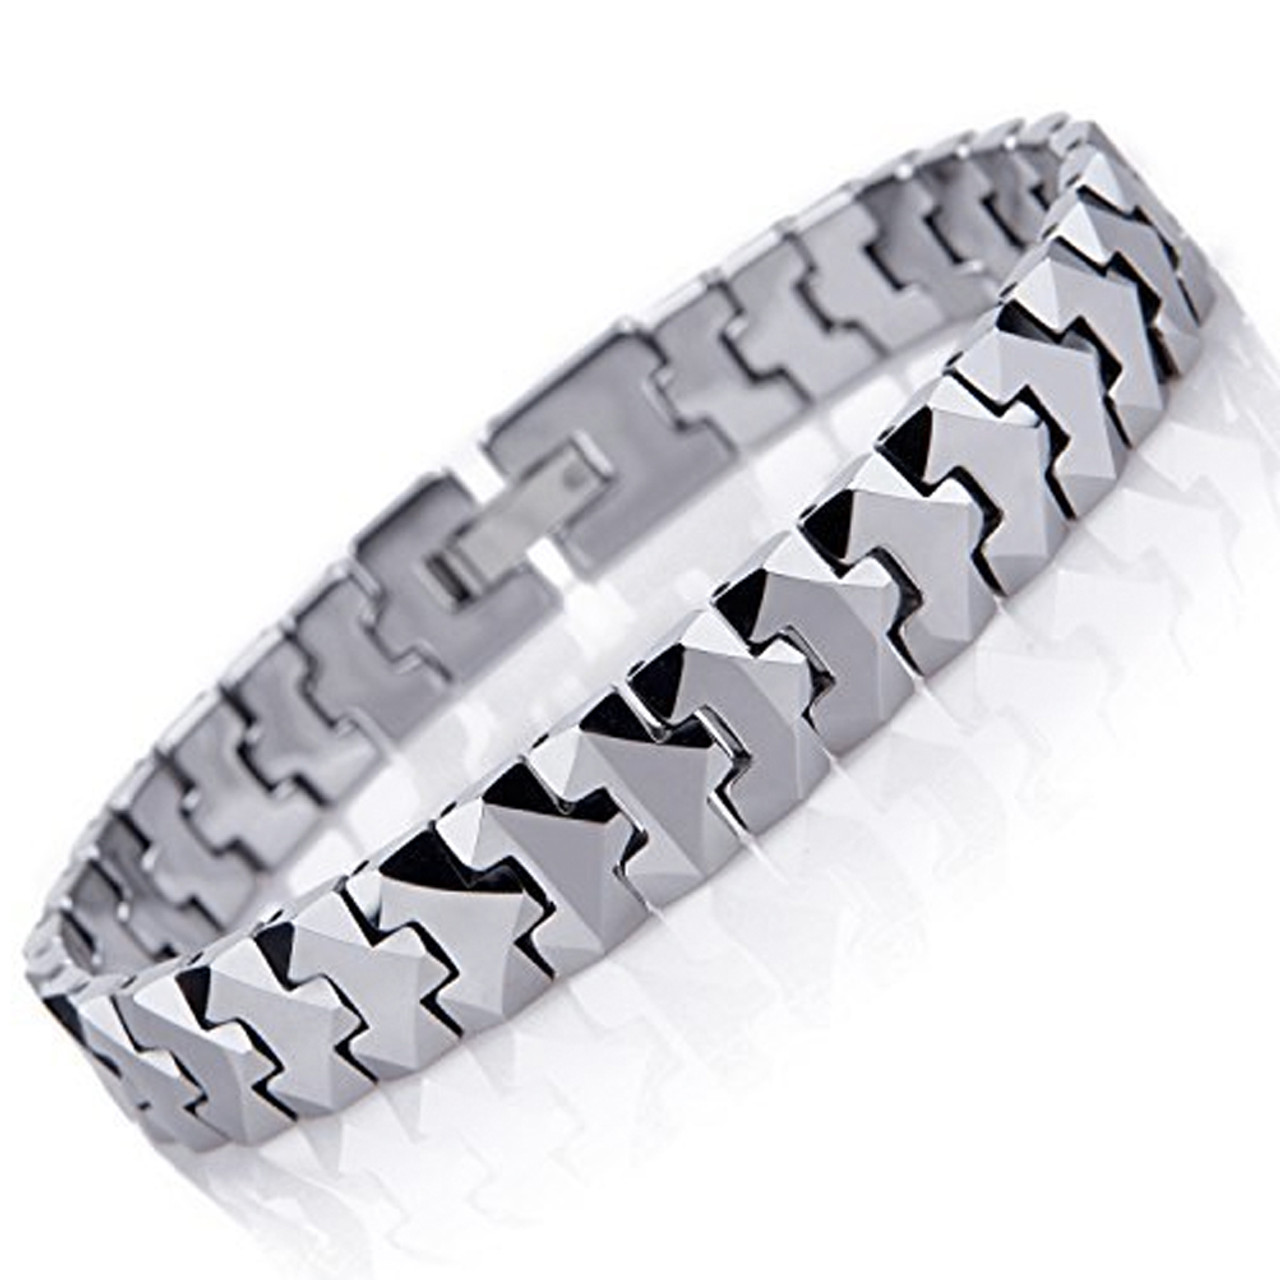 8.25" Inch Length - Mens Tungsten Bracelet - Silver Tone 10mm wide - Solid Link Tungsten Carbide Bracelet with Puzzle Piece Style Design 